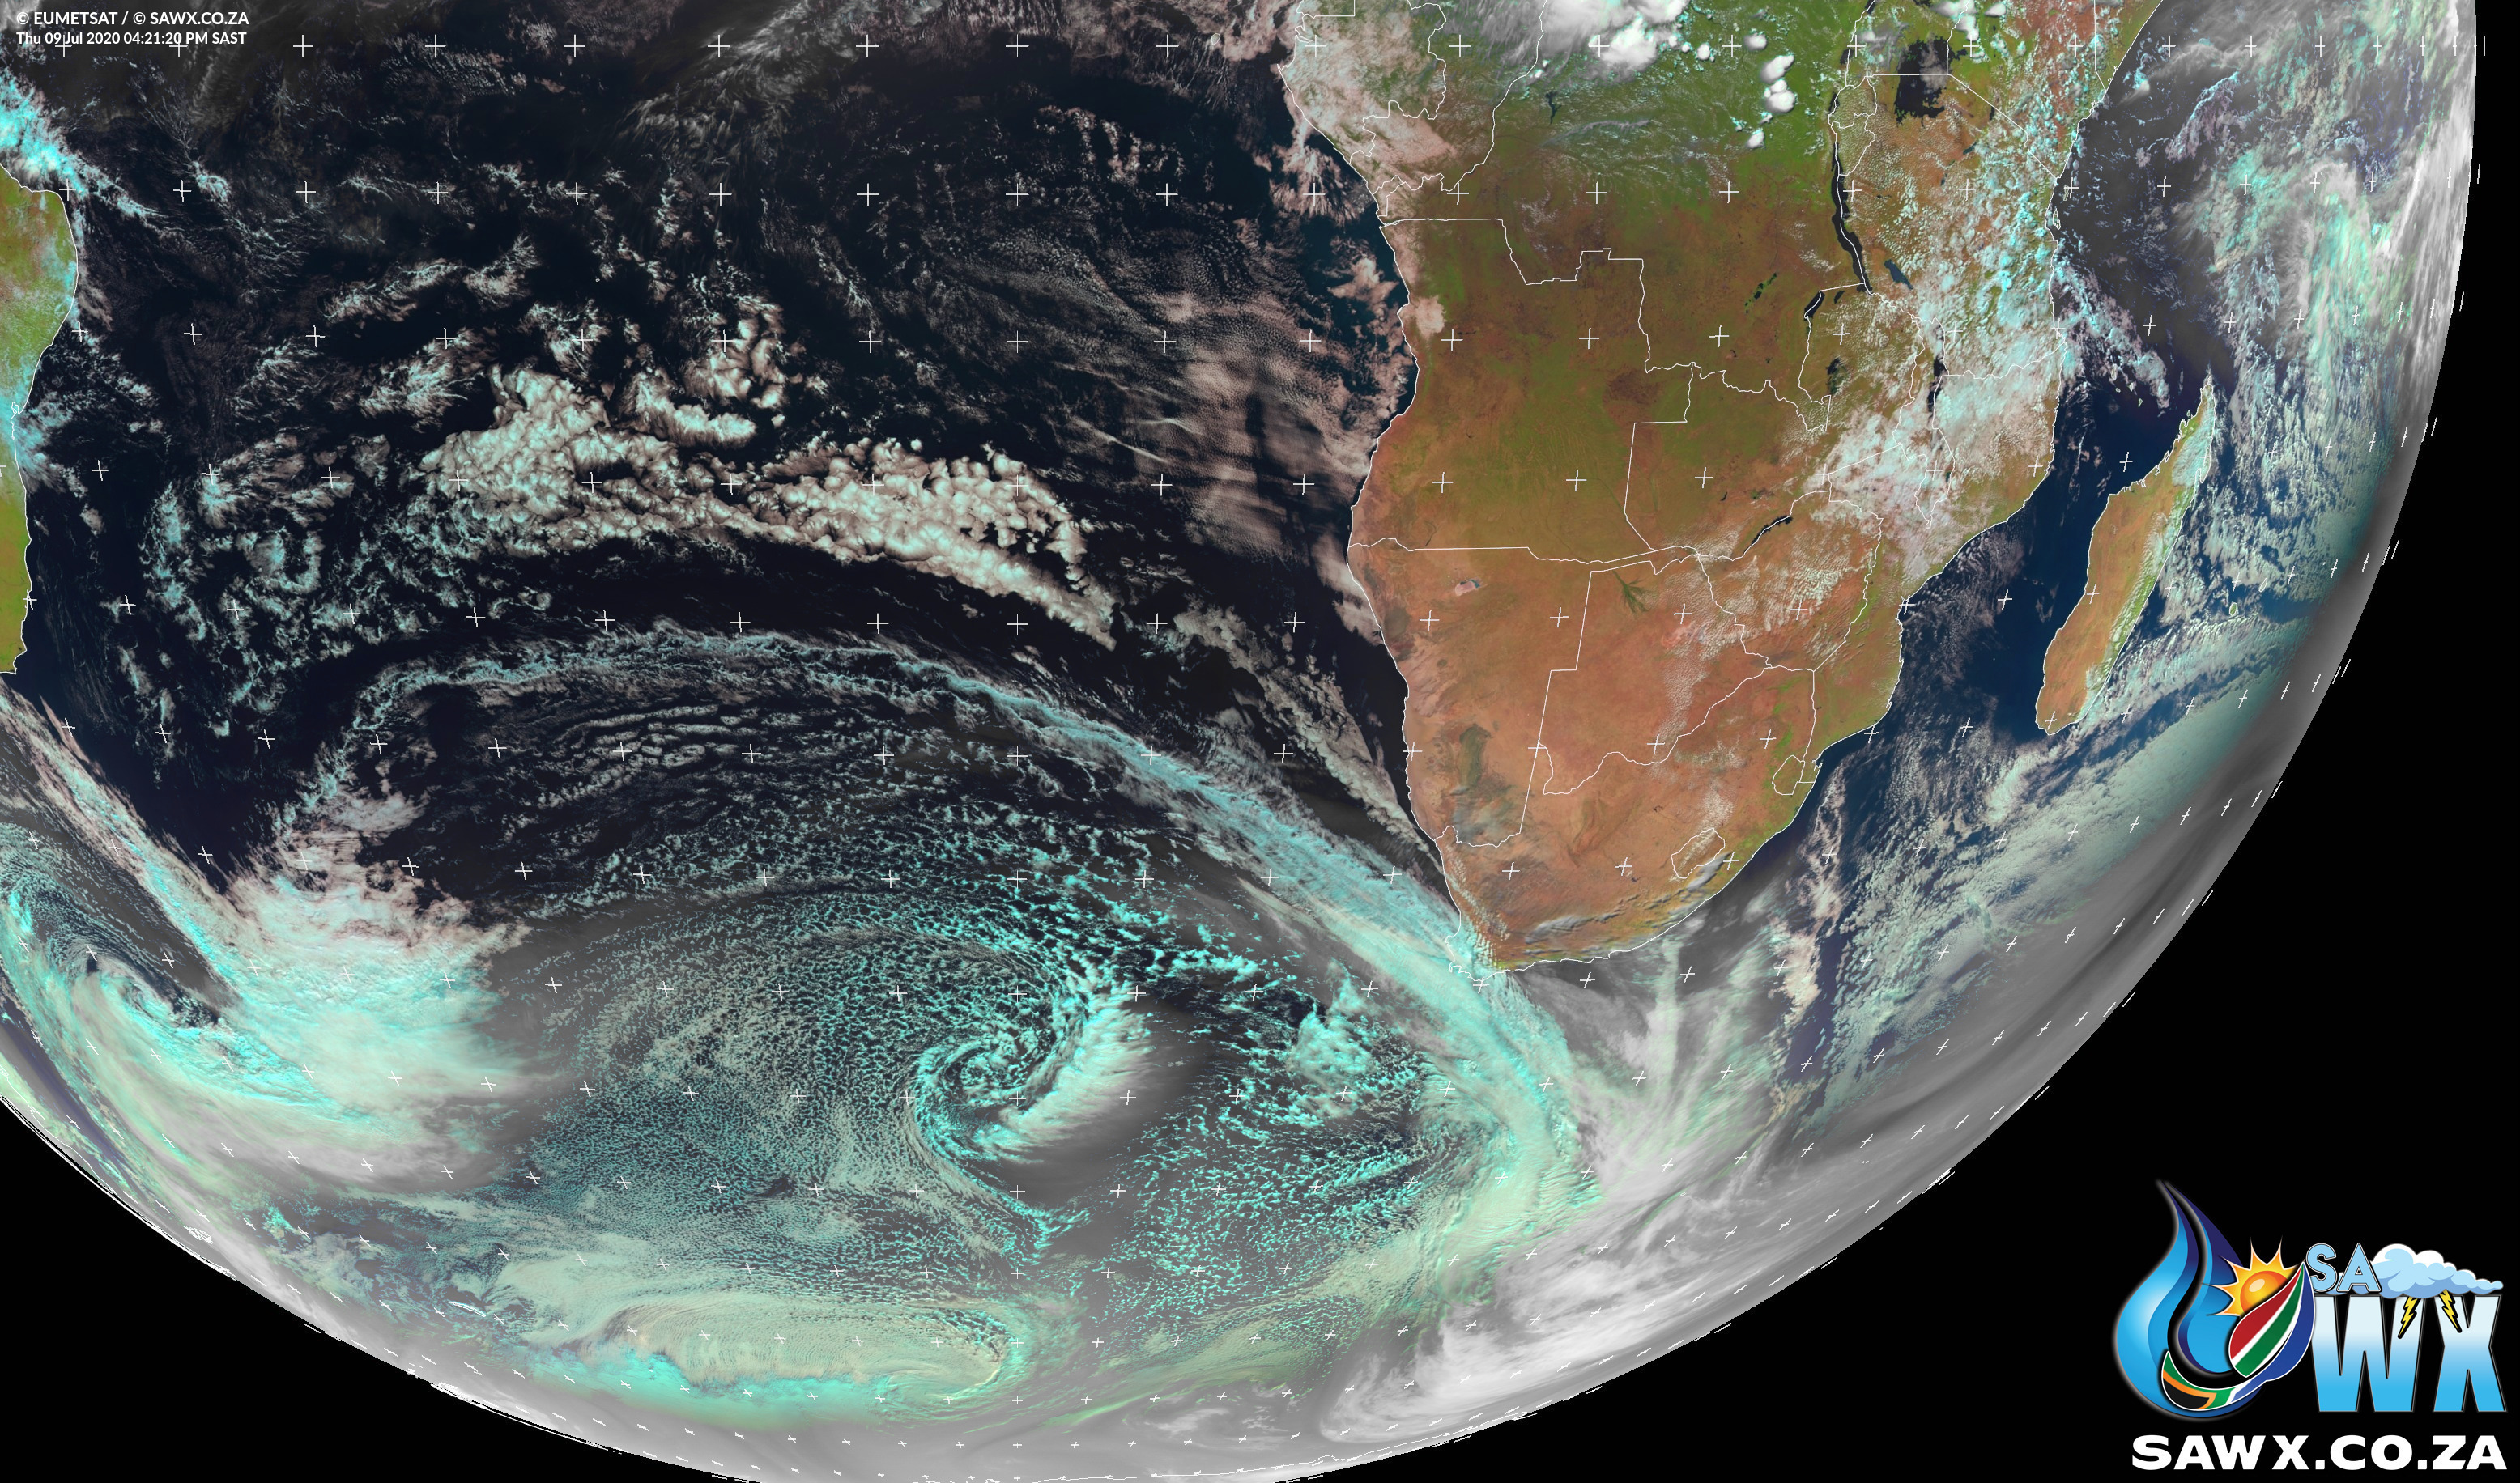 spectraview composite satellite image of the #coldfronts impacting South Africa